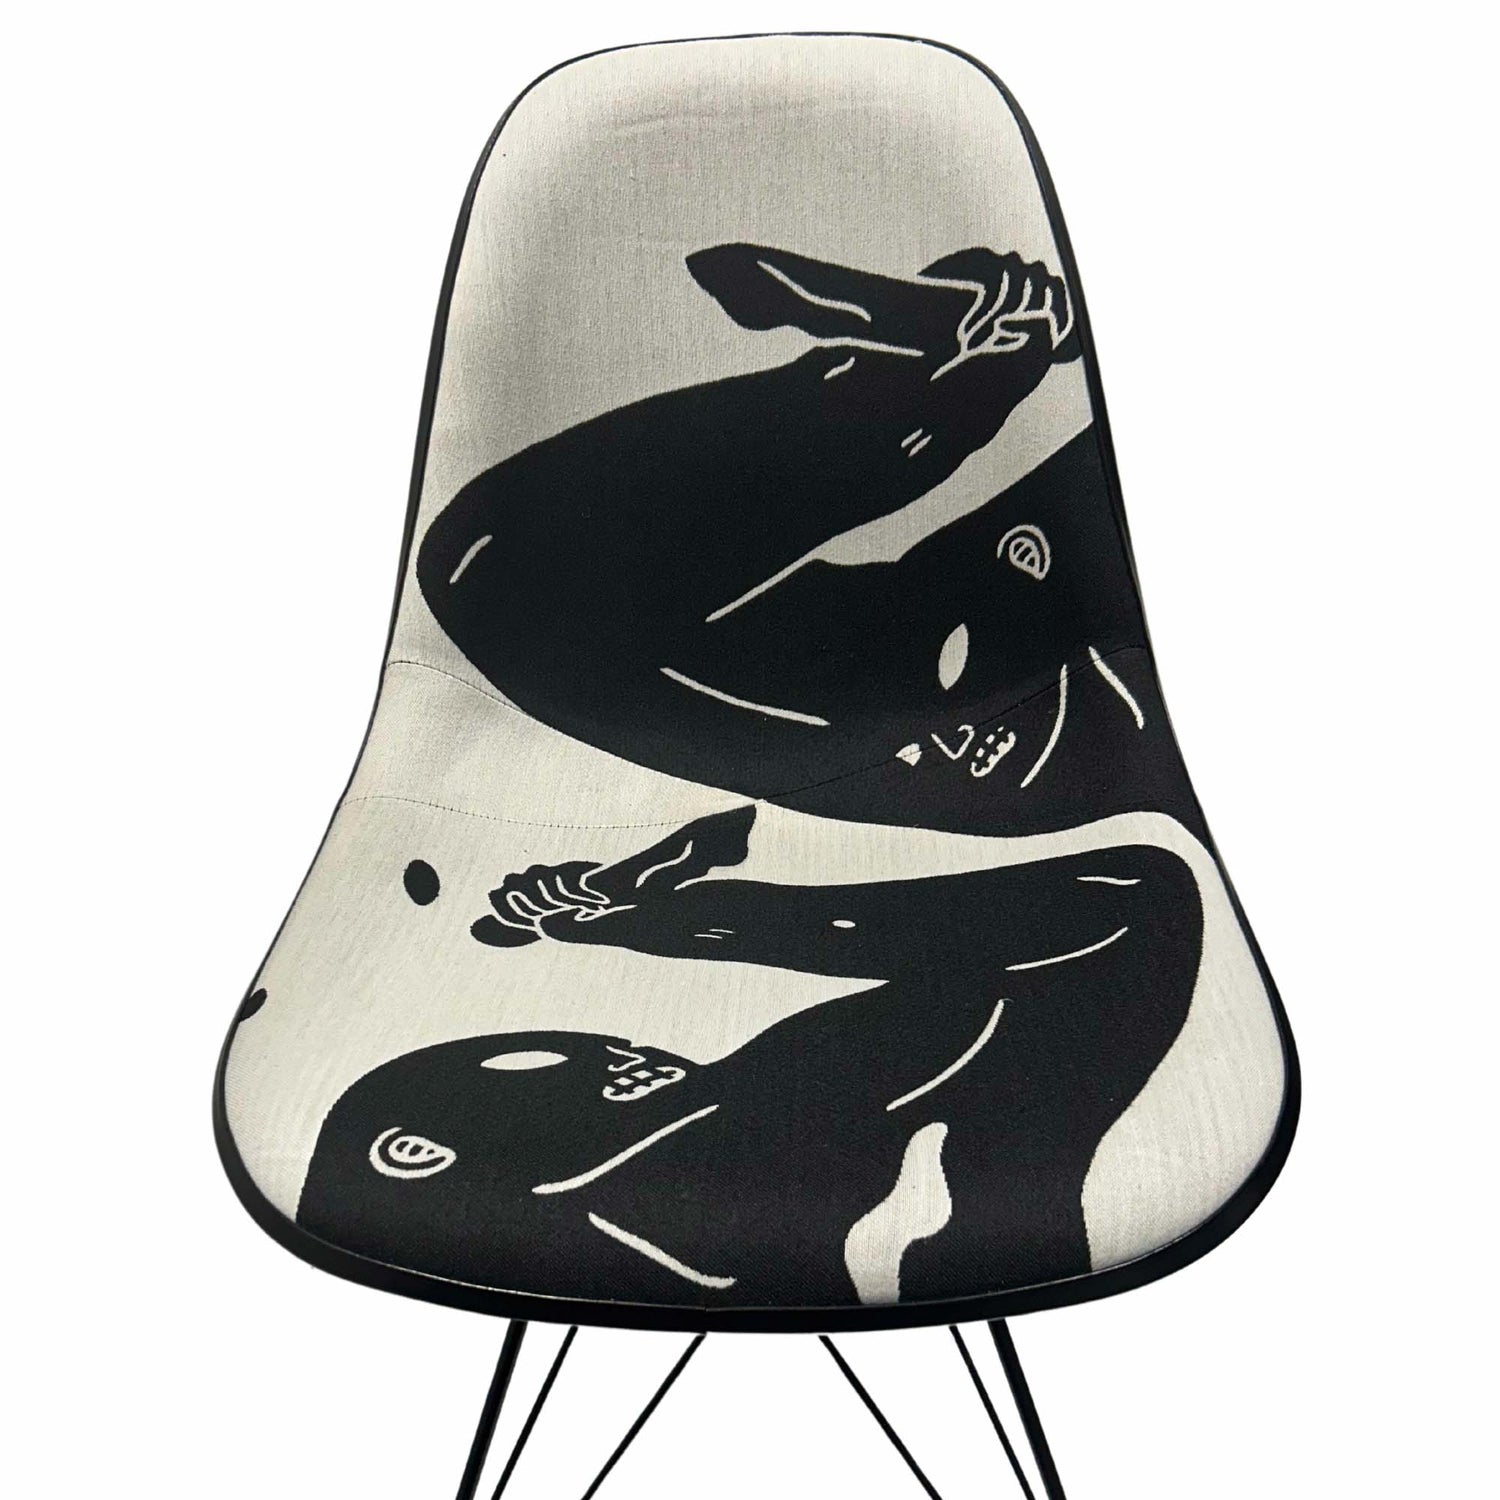 Cleon Peterson Sculpture Chair Extra